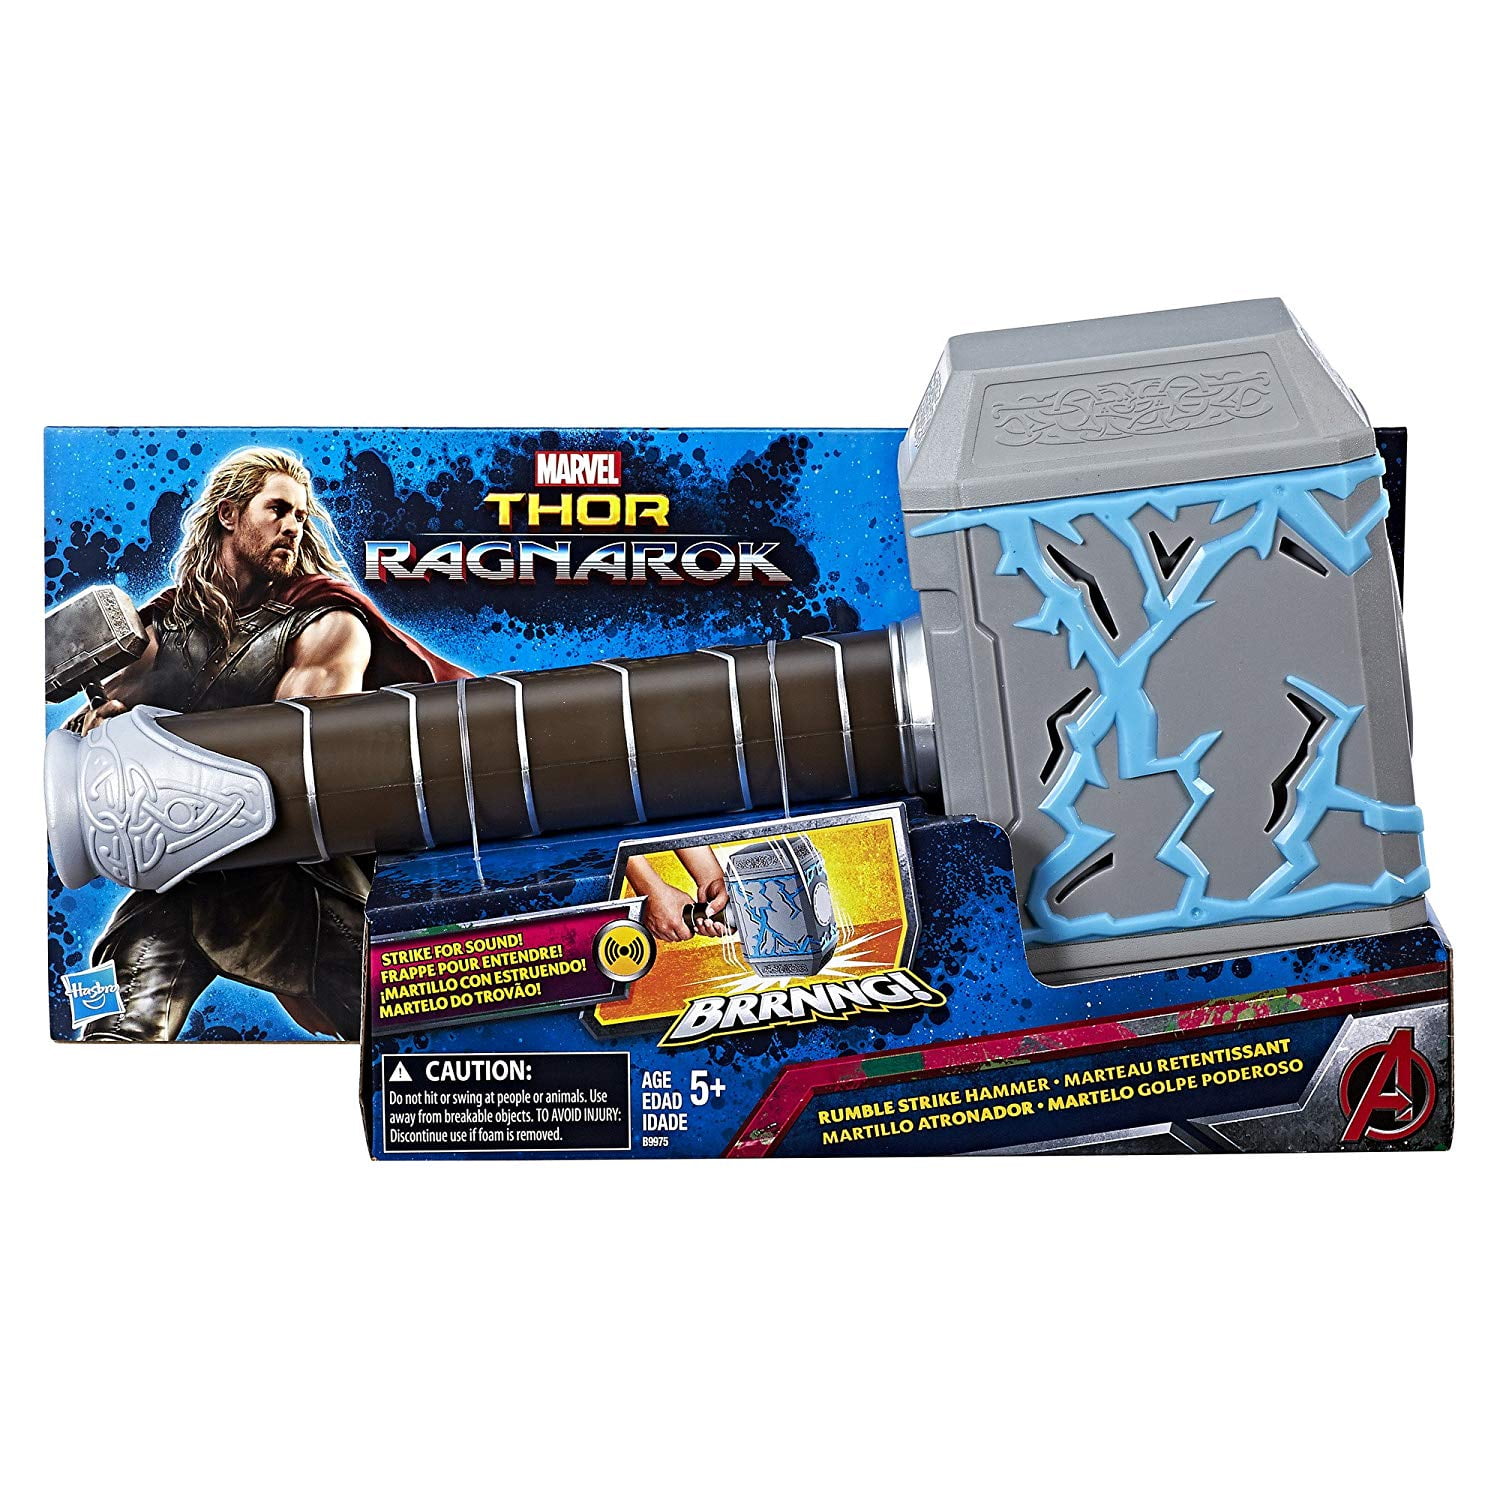 THOR RUMBLE STRIKER HAMMER Hasbro ROLEPLAY THOR Ragnarok 2018 14" Inches SOUNDS 